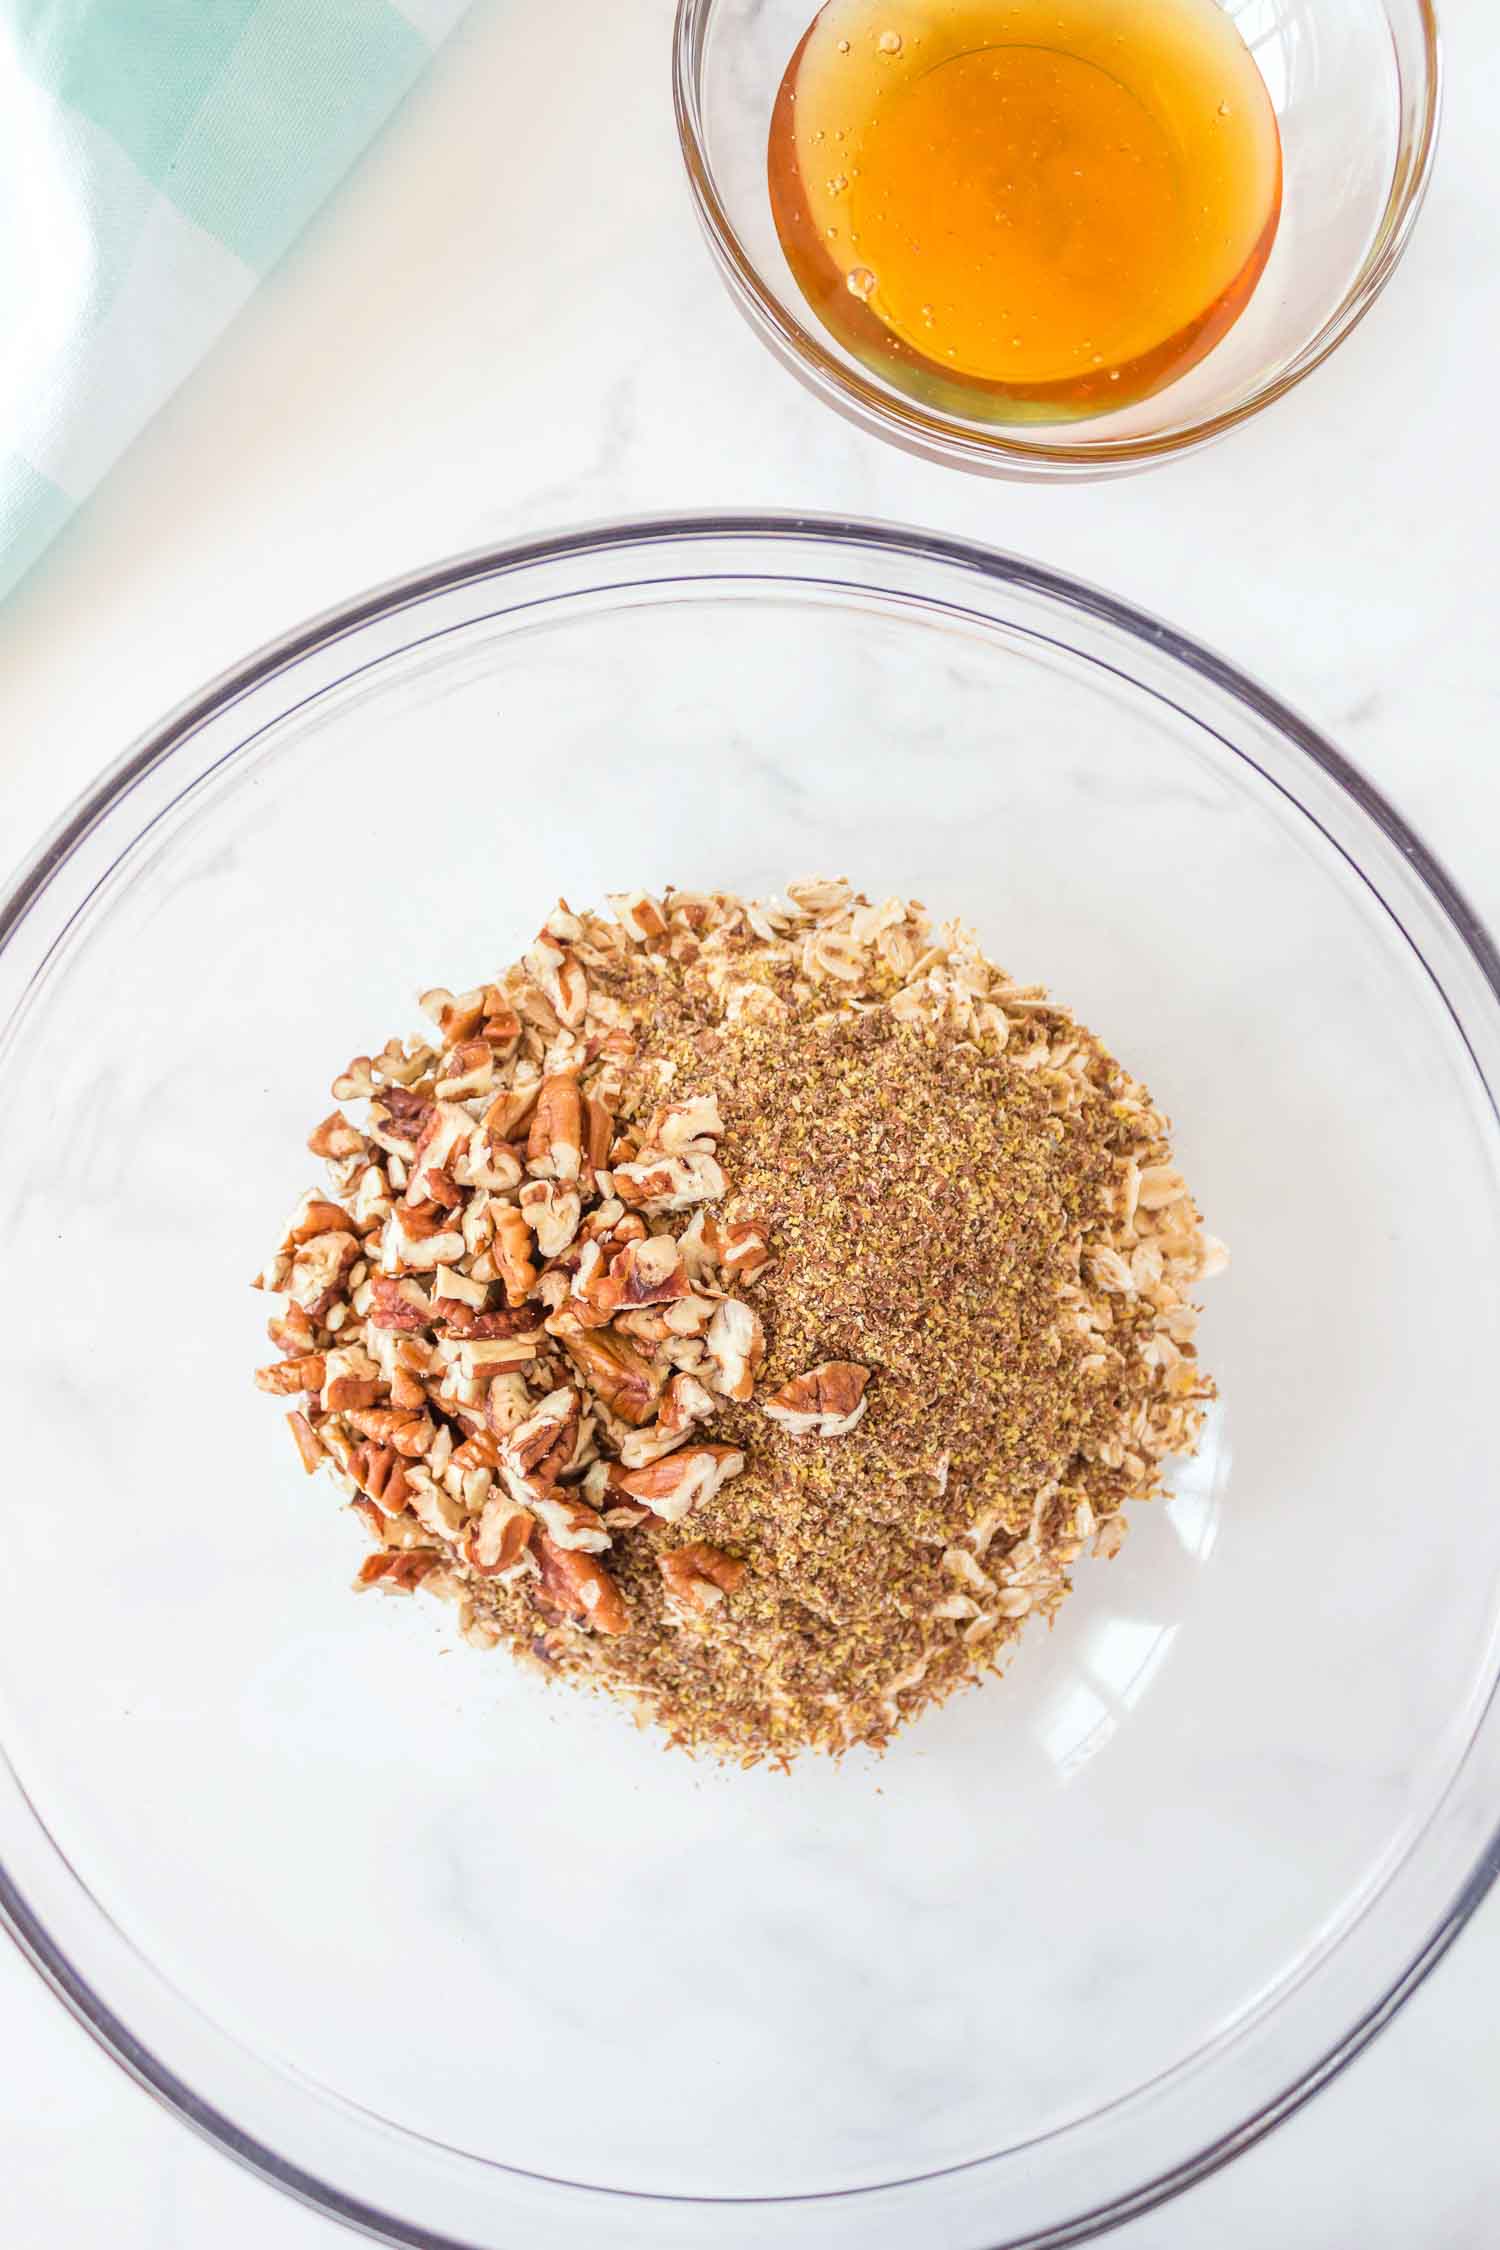 A large glass bowl of oatmeal with spices and pecans in it with a small glass bowl of honey behind it.